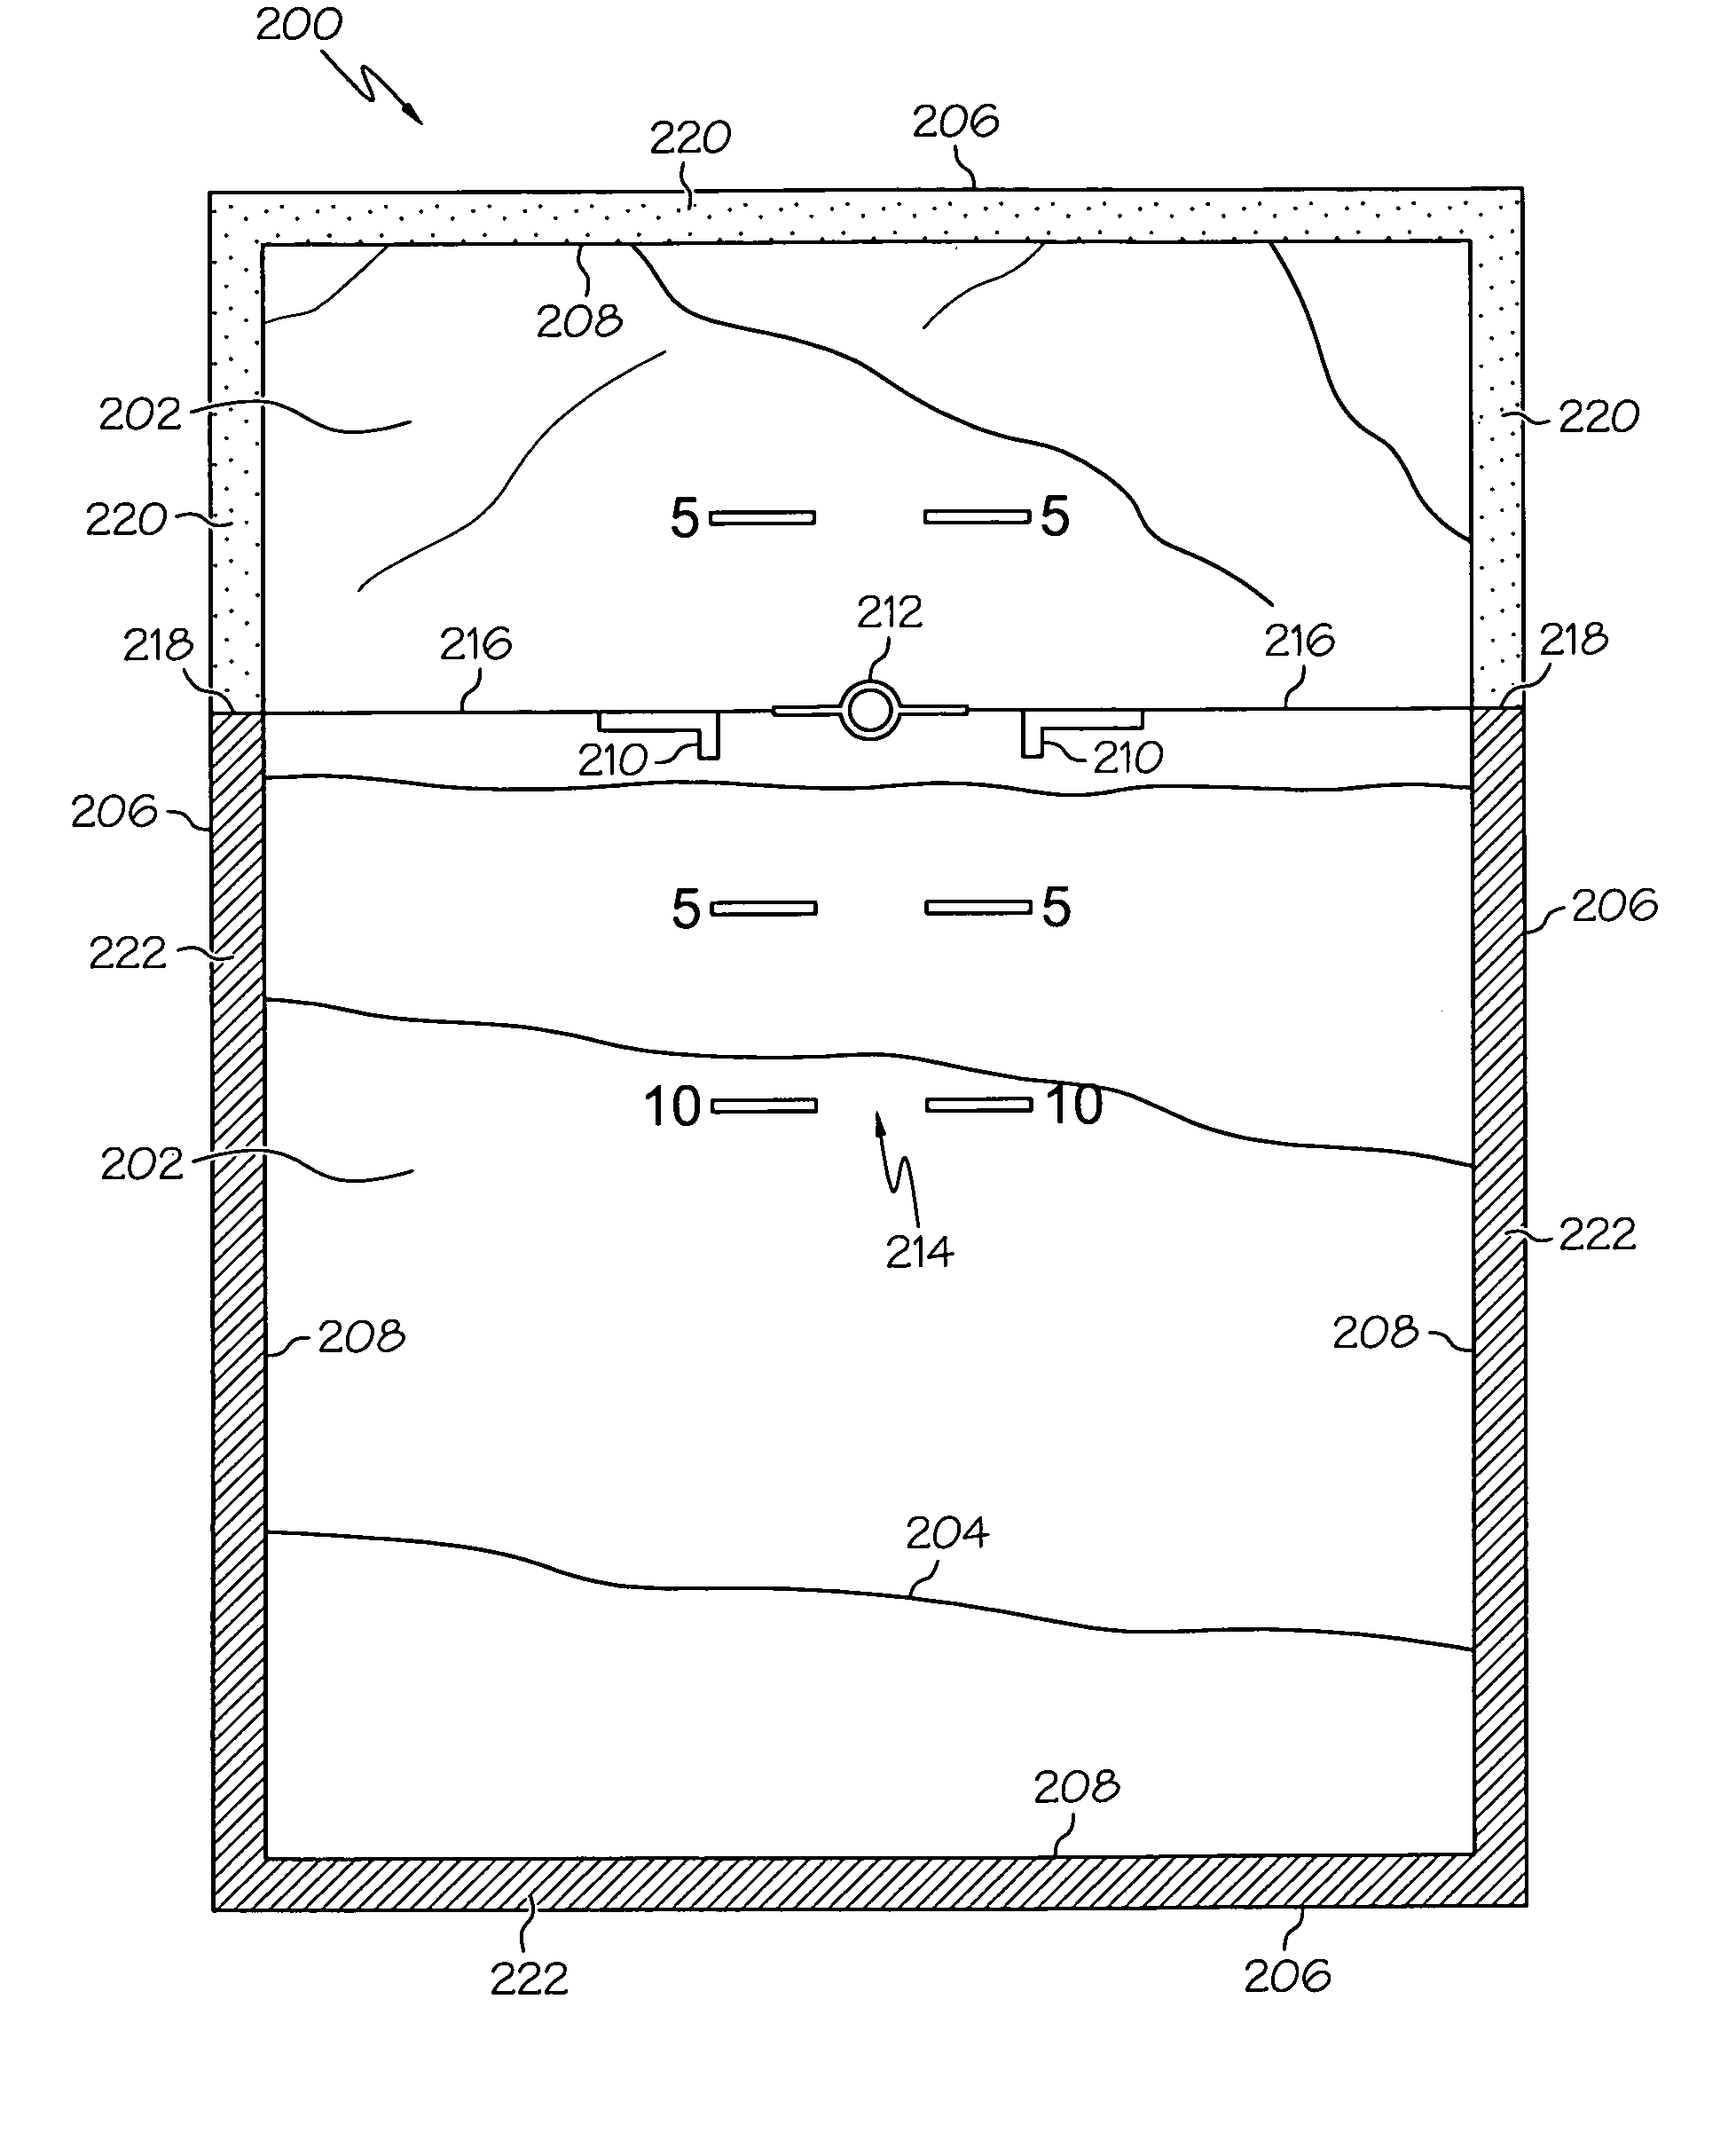 System and method for rendering a primary flight display having an attitude frame element